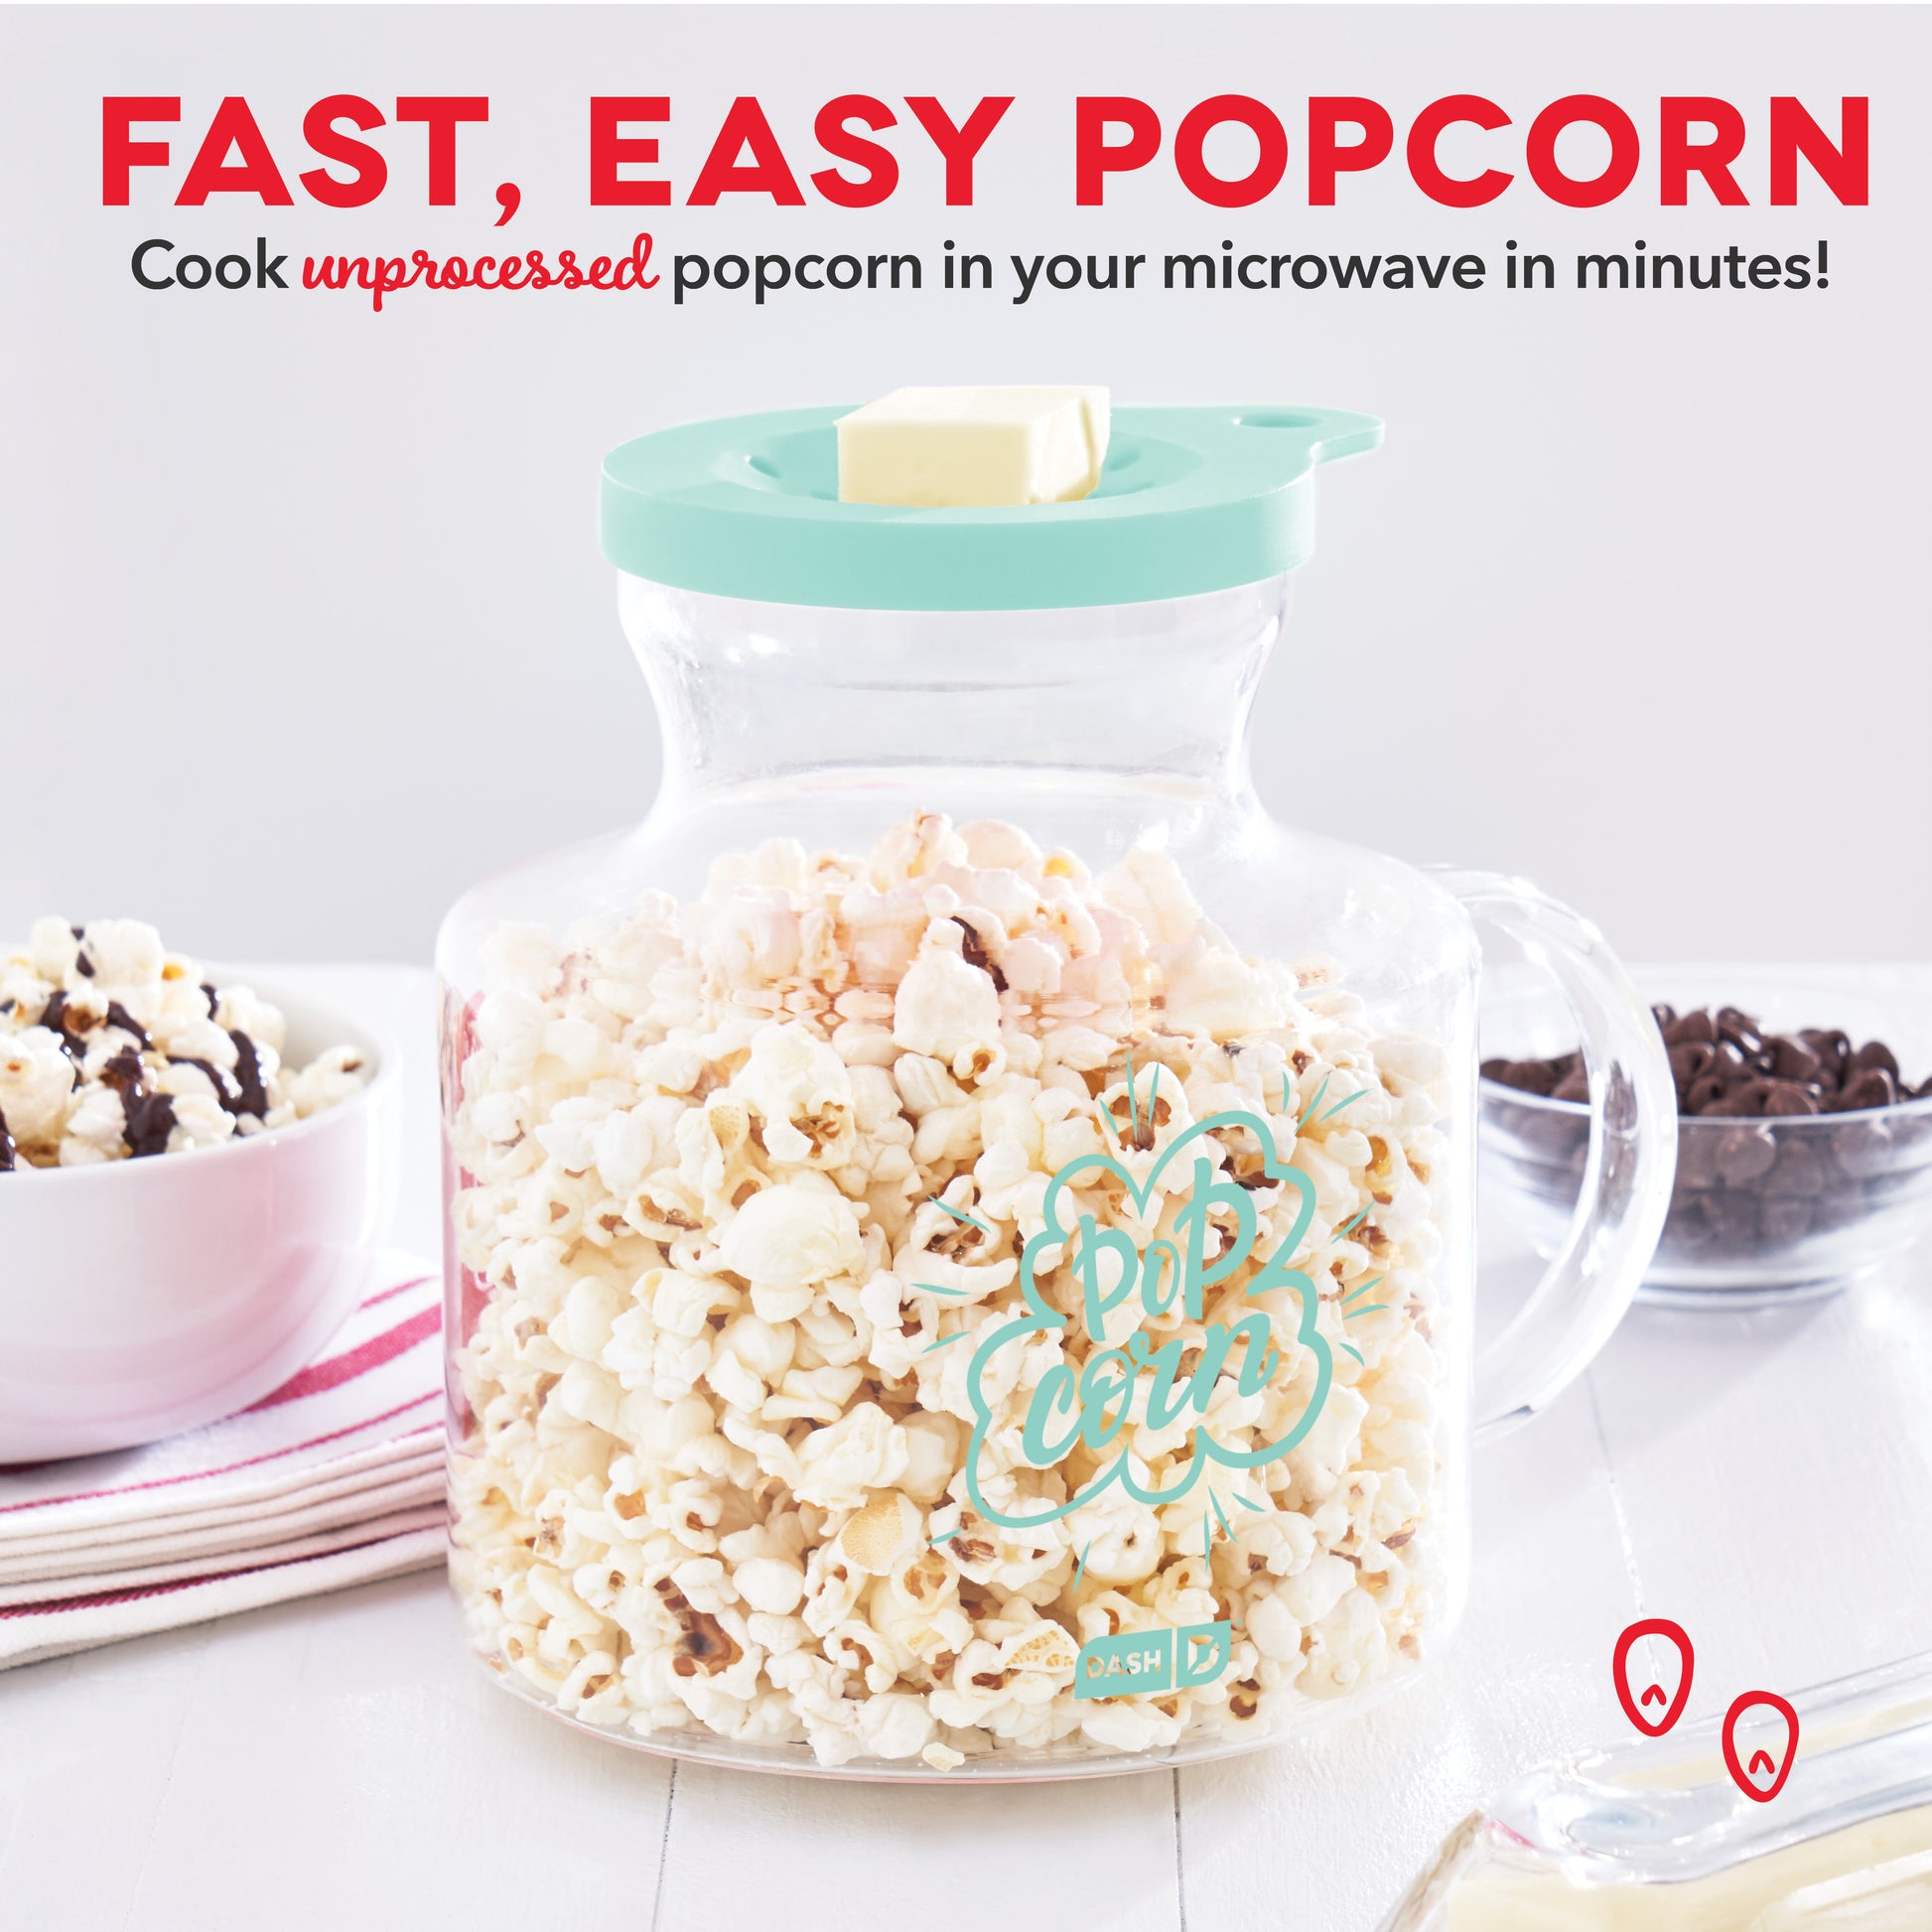 Silicone Popcorn Popper Microwave Collapsible - Popcorn Buckets Reusable |  Microwave Popcorn Maker | Popcorn Bowls Set | Air Popper Popcorn Maker 